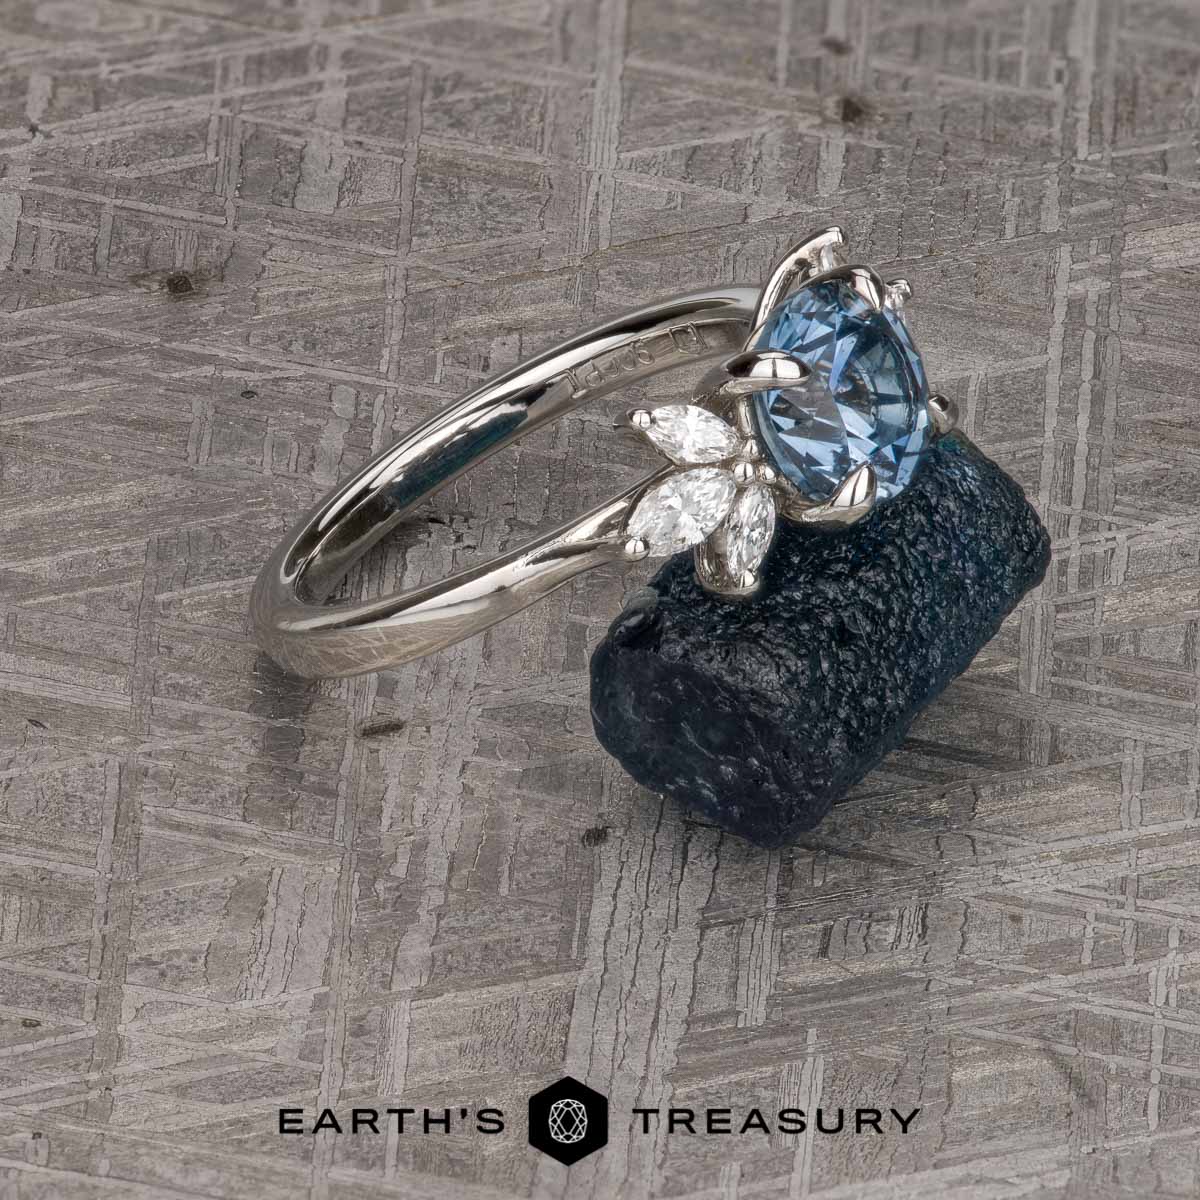 The "Liriope" Ring in Platinum with 1.57-carat Montana sapphire